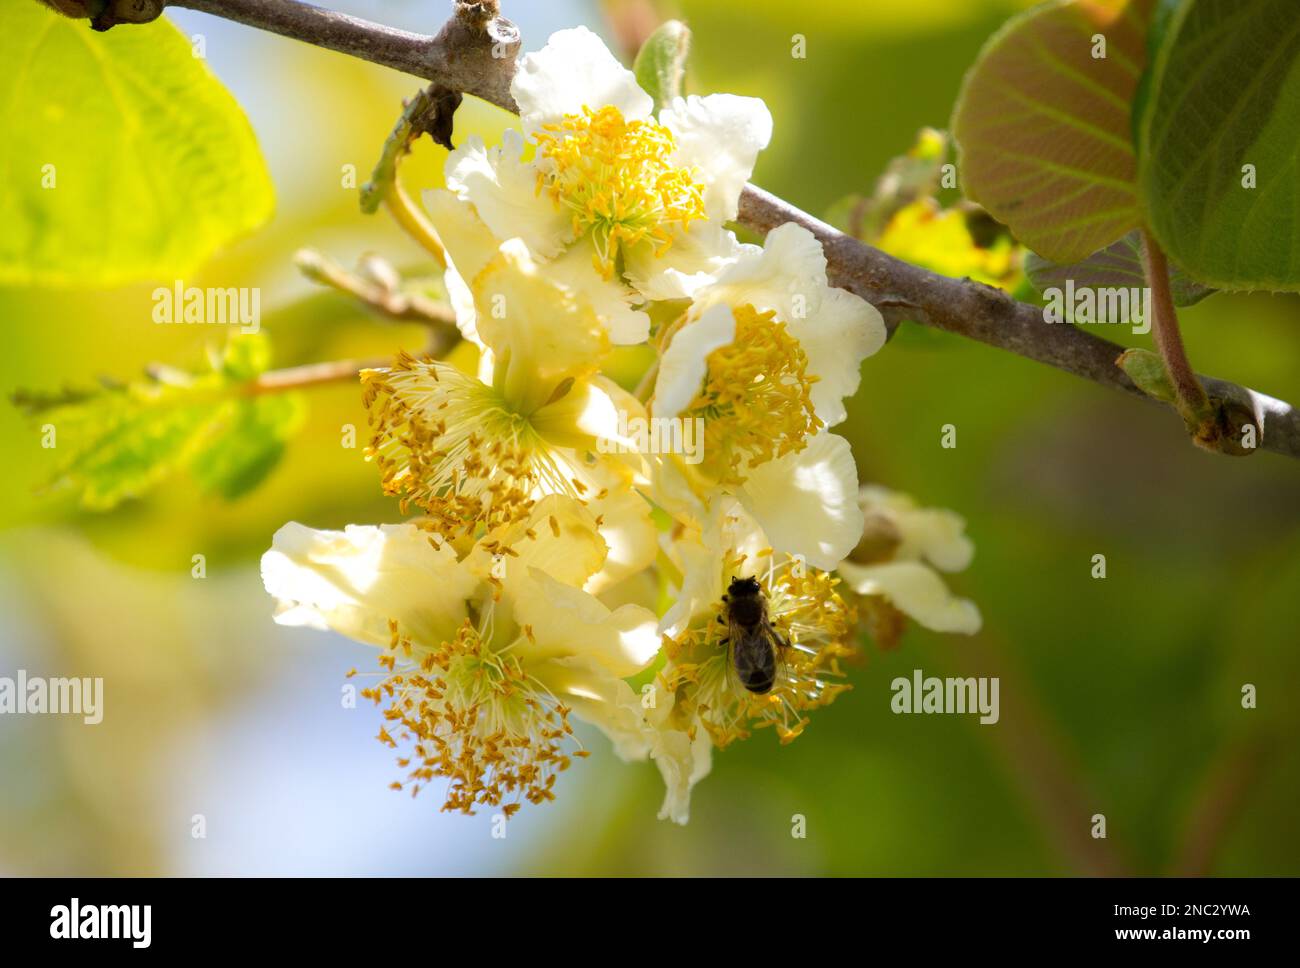 A bee collects pollen on white kiwi flowers. Stock Photo